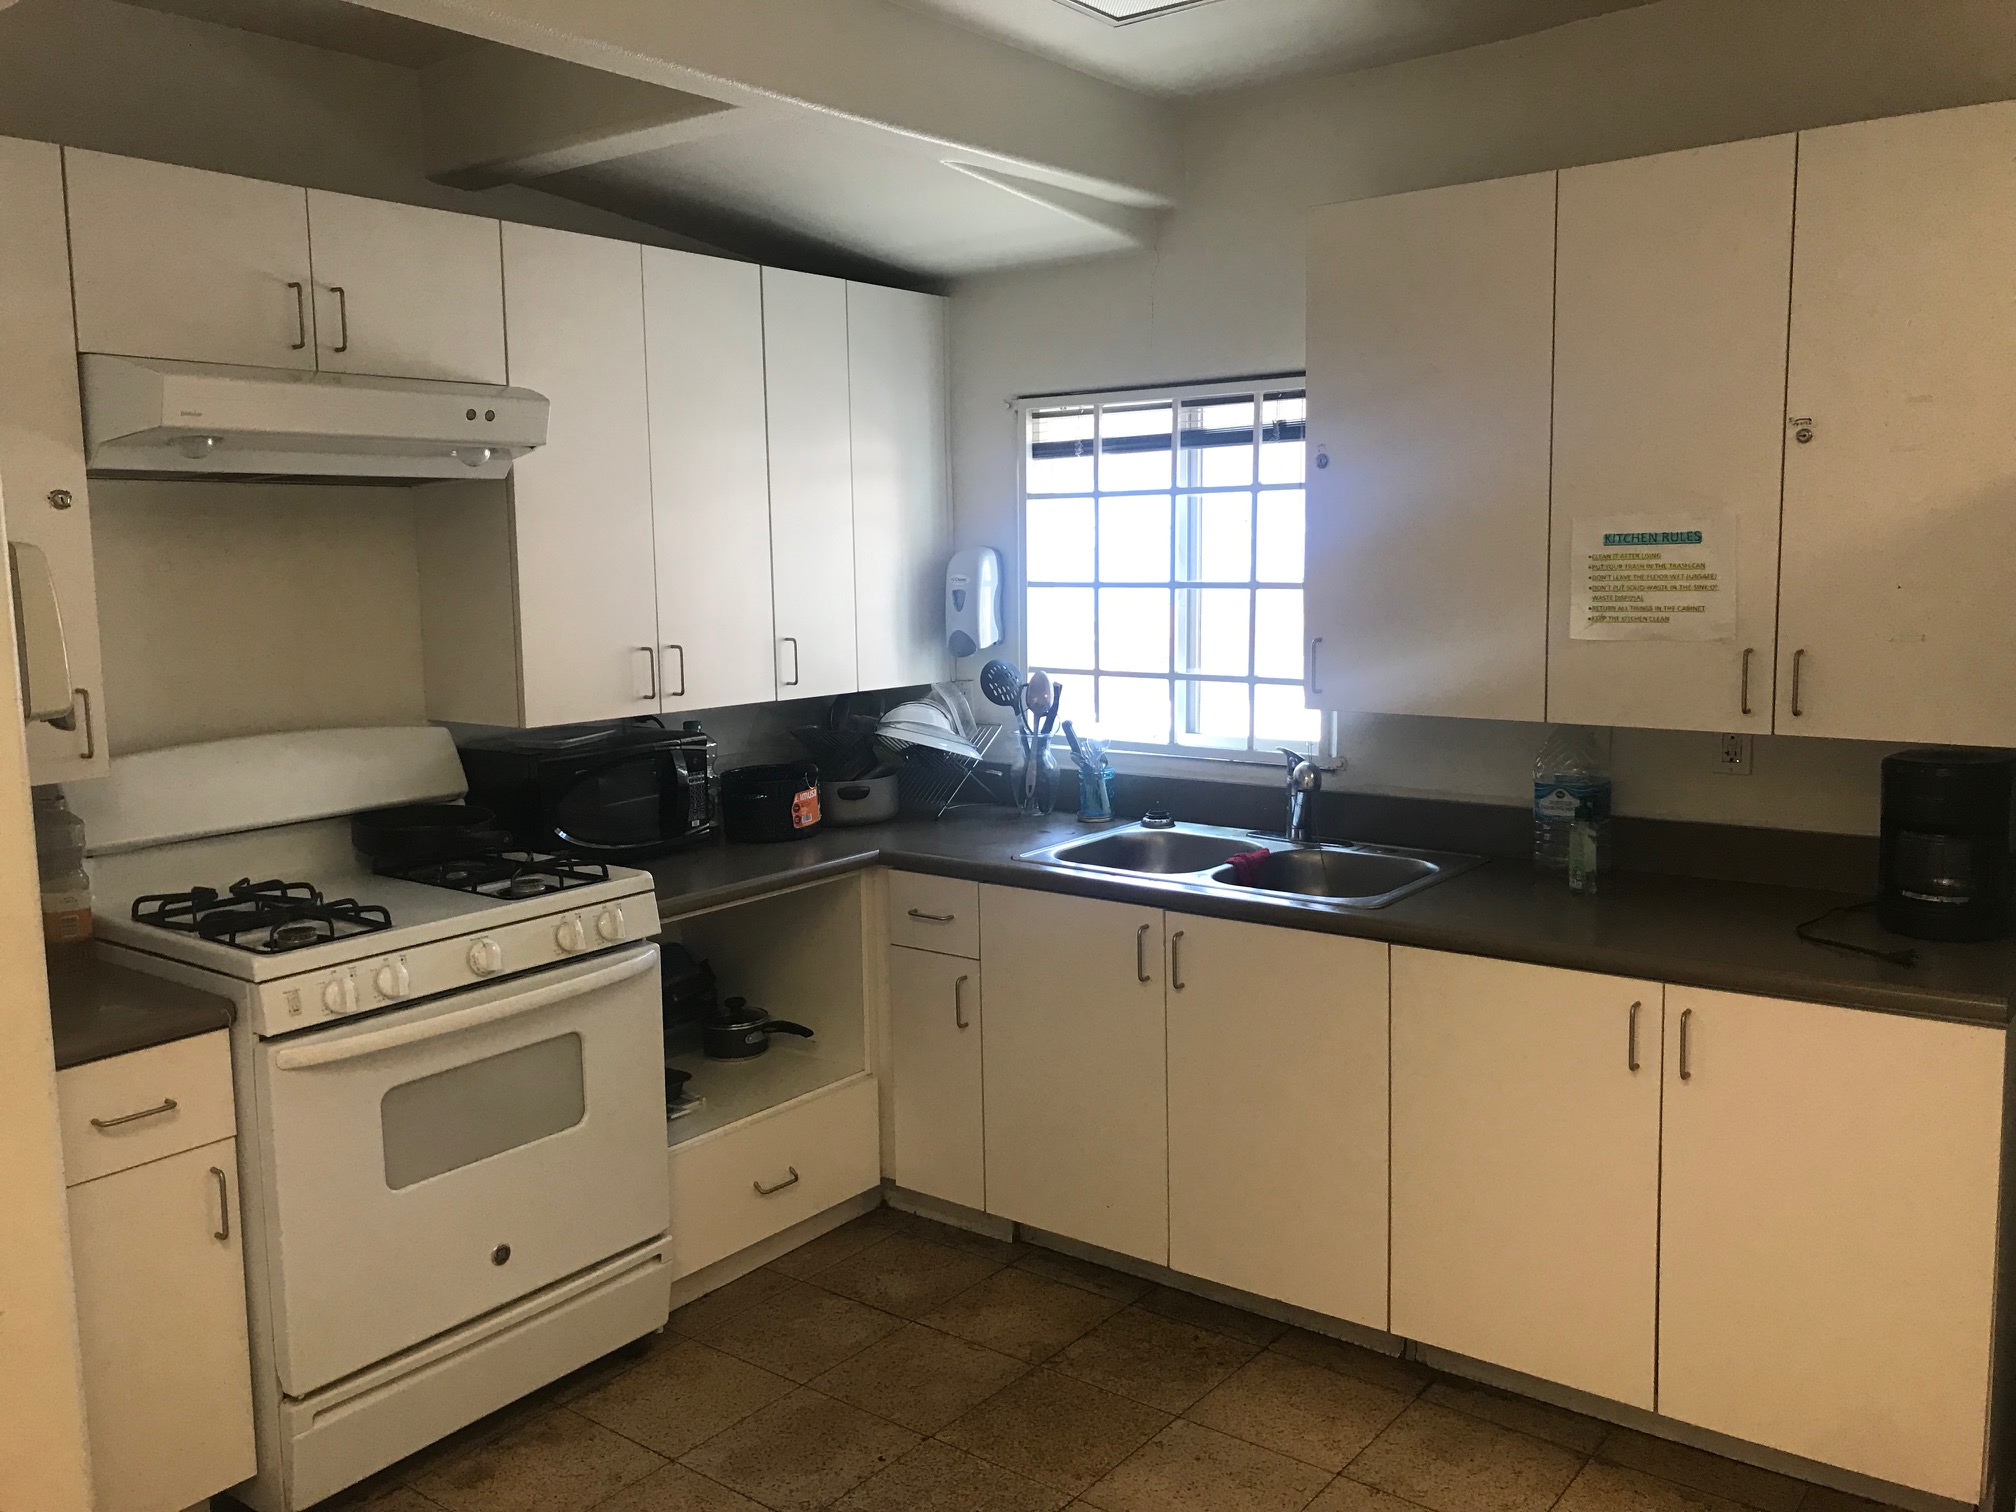 Left side view of a kitchen, white pantry, white stove with oven and under cabinet range hood, black microwave, pots, dishes, gallon of water, cooffe maker, soap dispenser, white window.